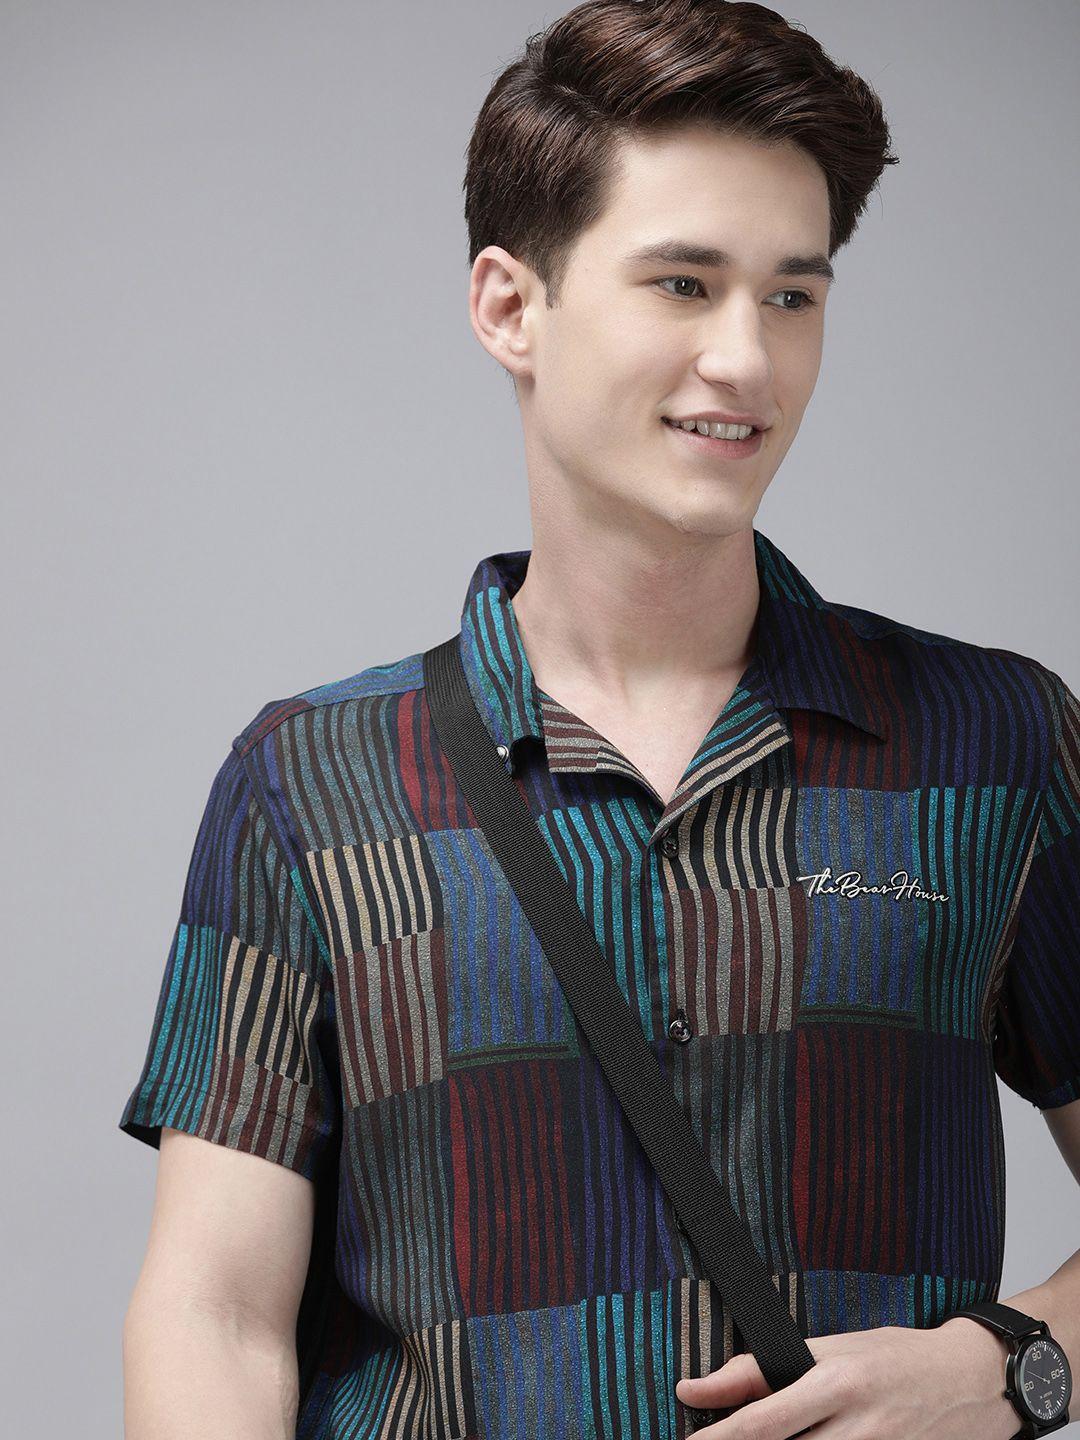 the-bear-house-men-black-and-blue-striped-slim-fit-party-shirt